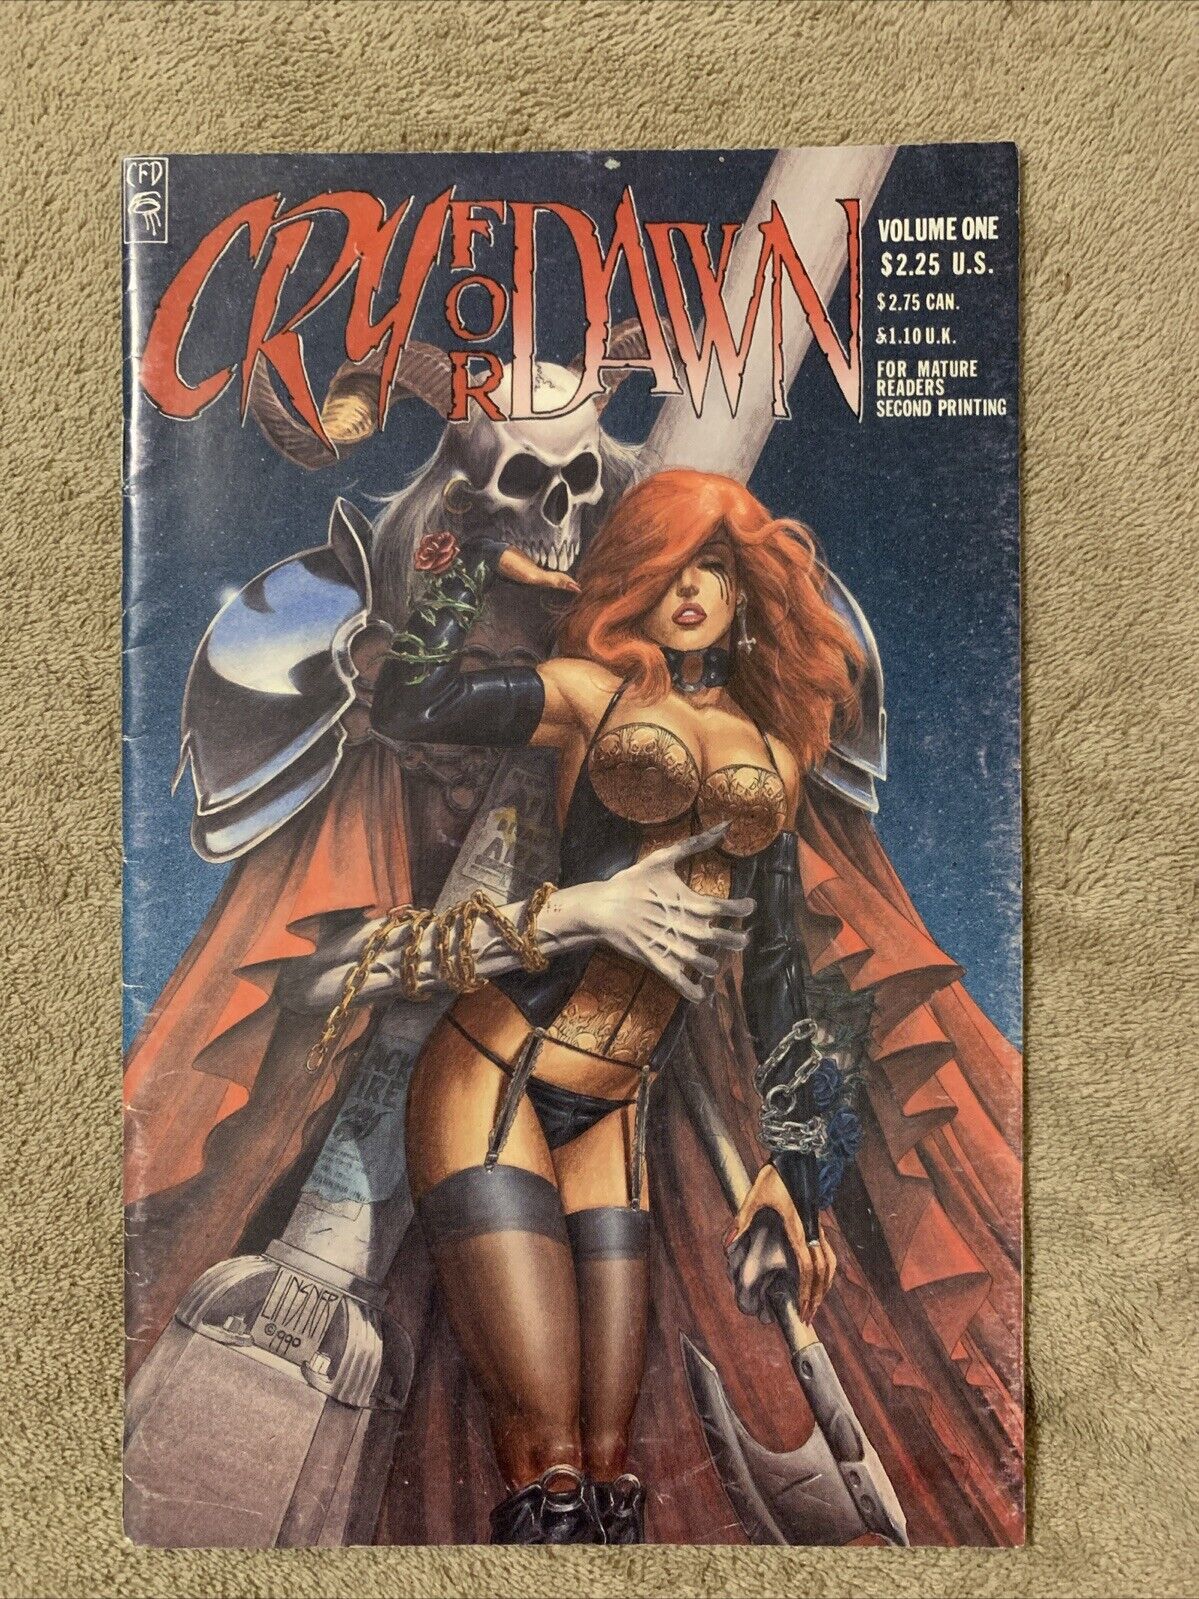 CRY FOR DAWN #1, 1990 2nd Print, Signed &Numbered by Both J. Linsner & J. Monks